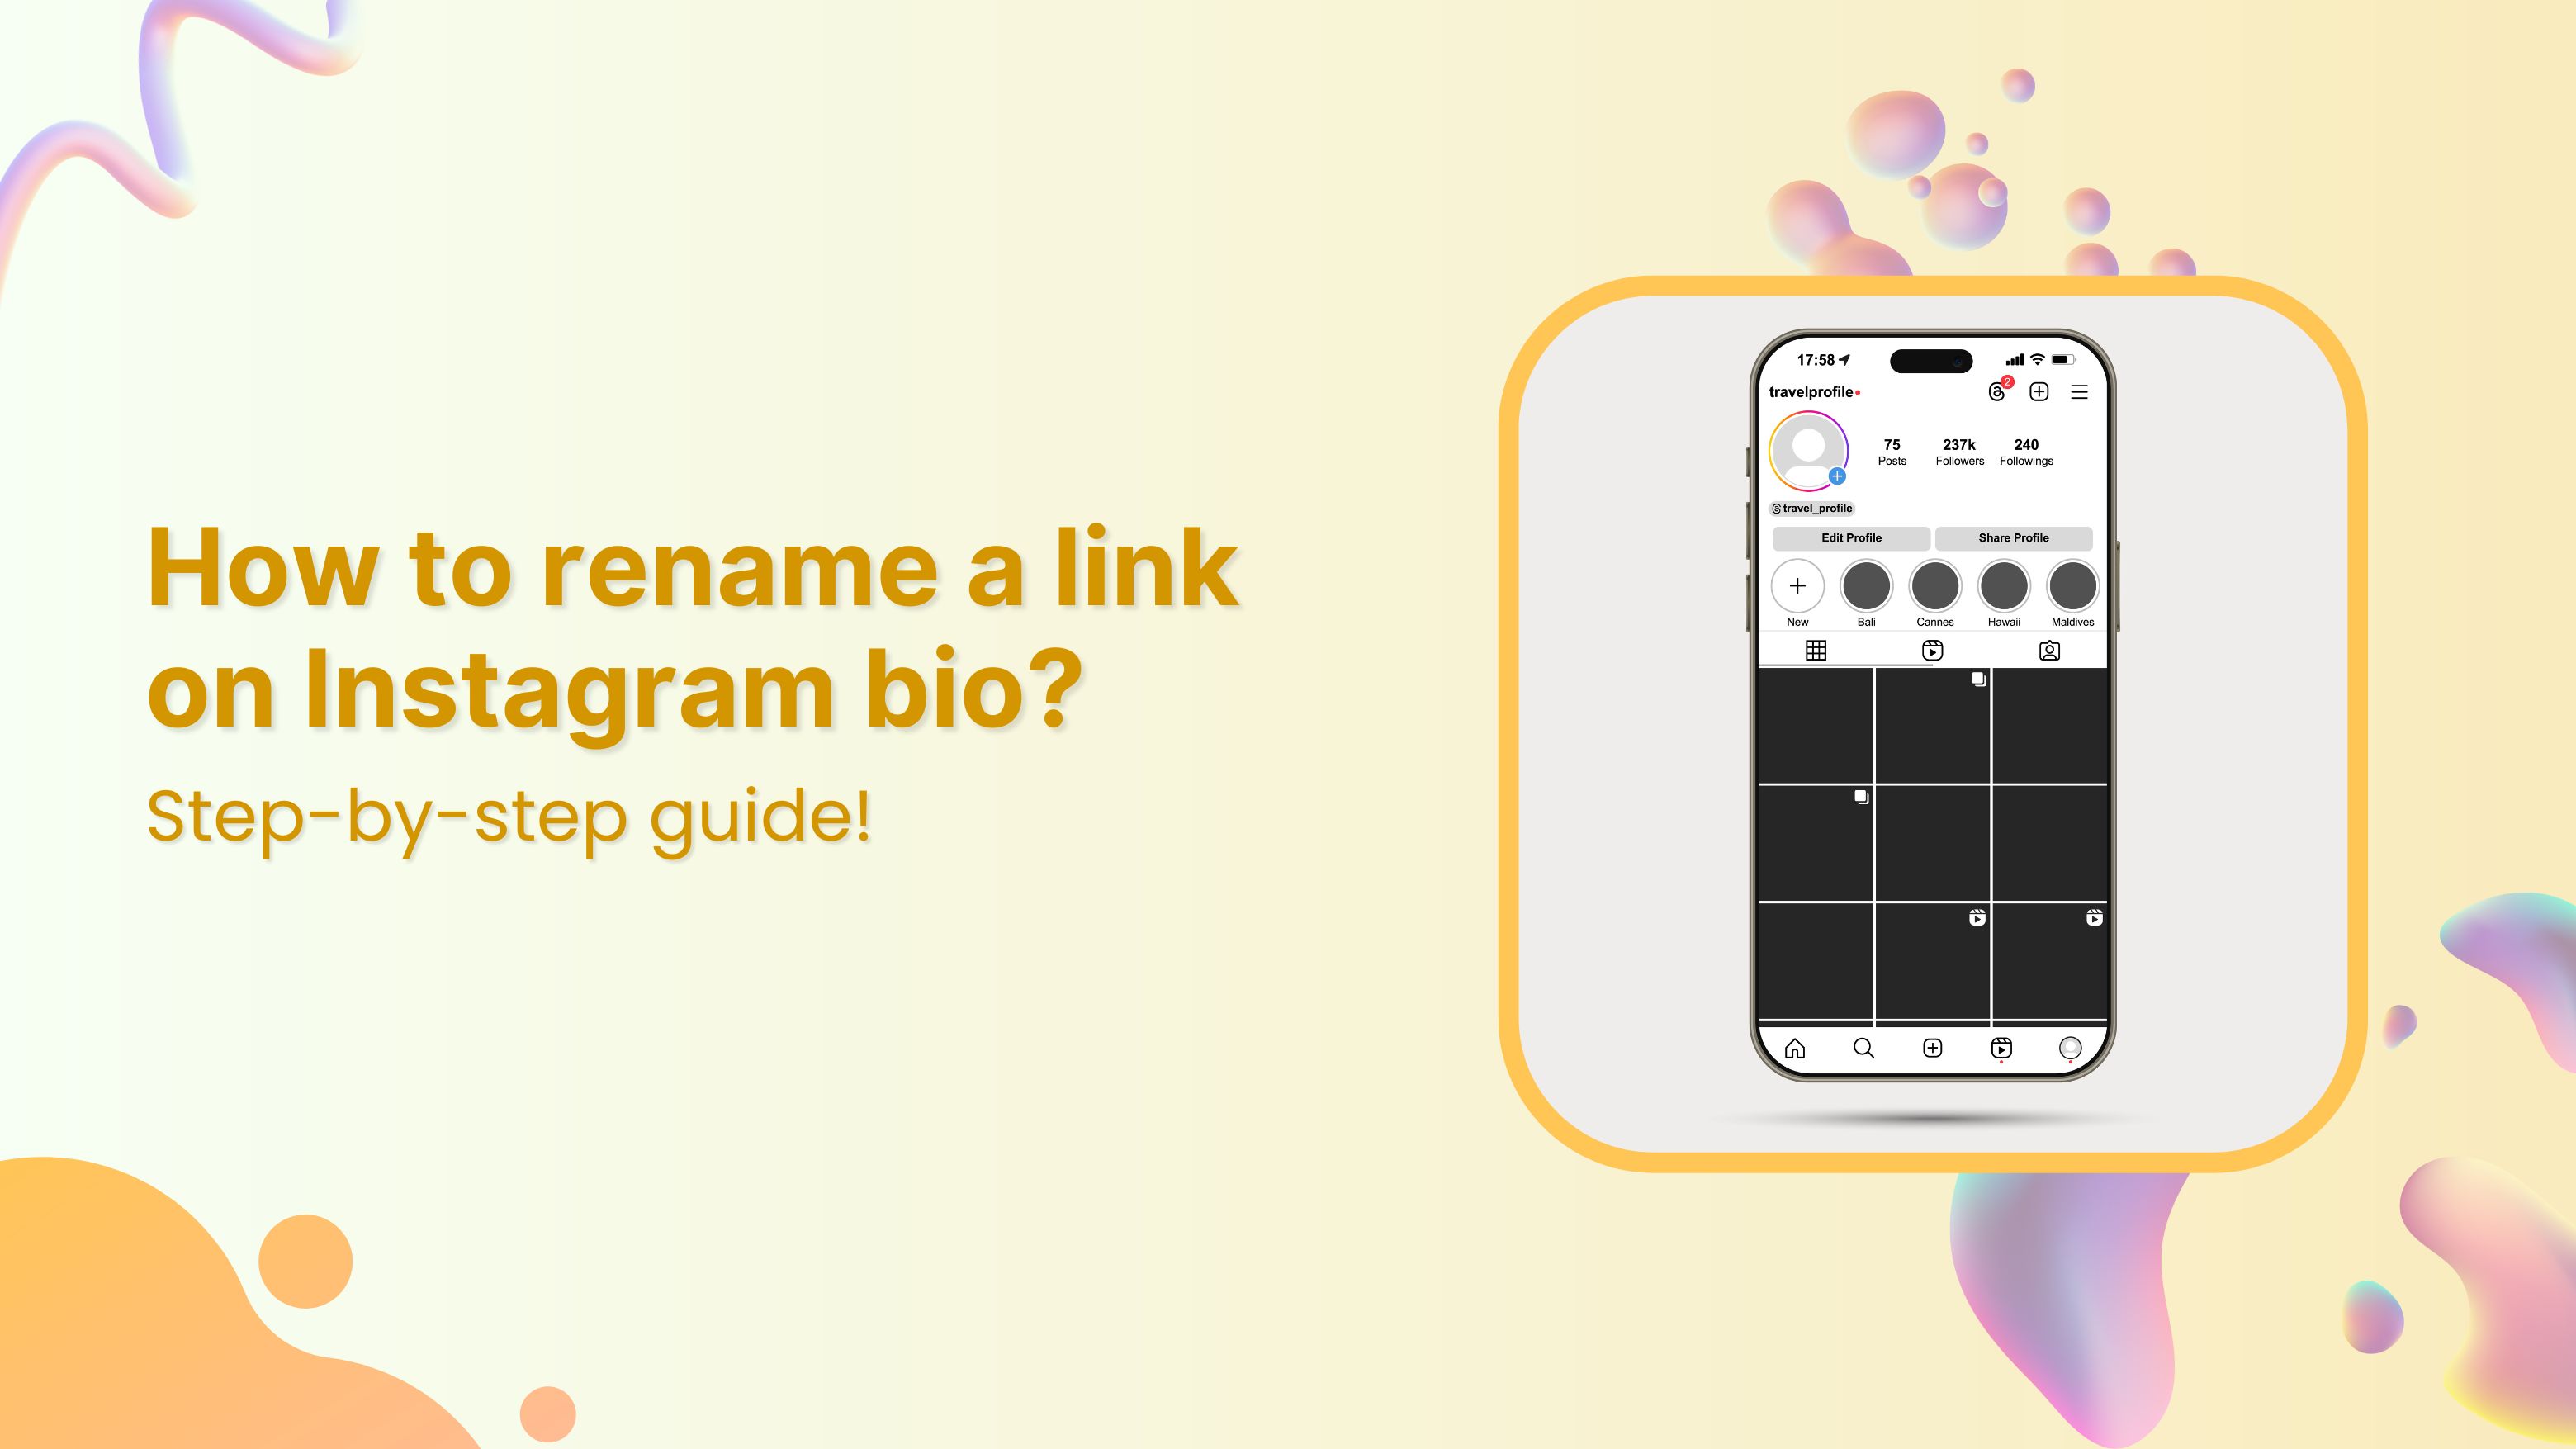 How to rename a link on Instagram bio?